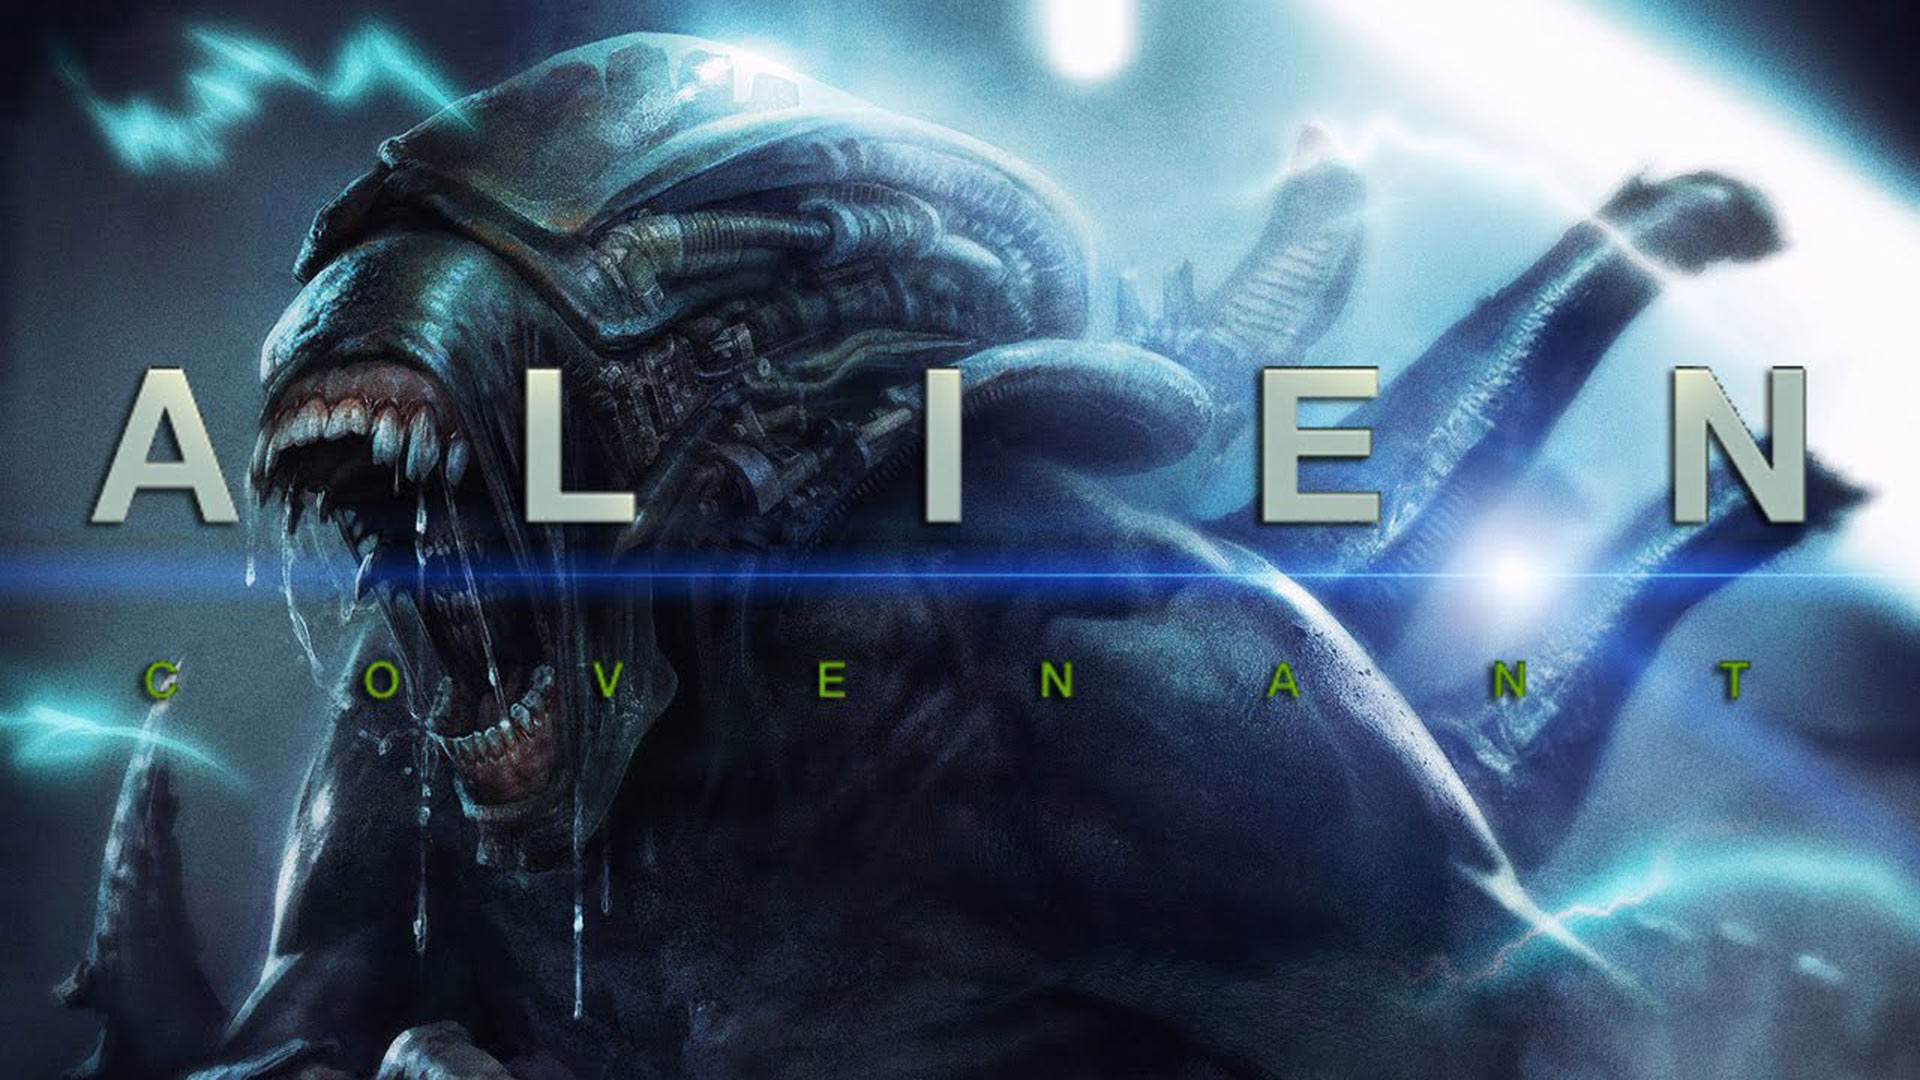 Covenant Widescreen Wallpapers - Alien Covenant Movie 2017 - HD Wallpaper 